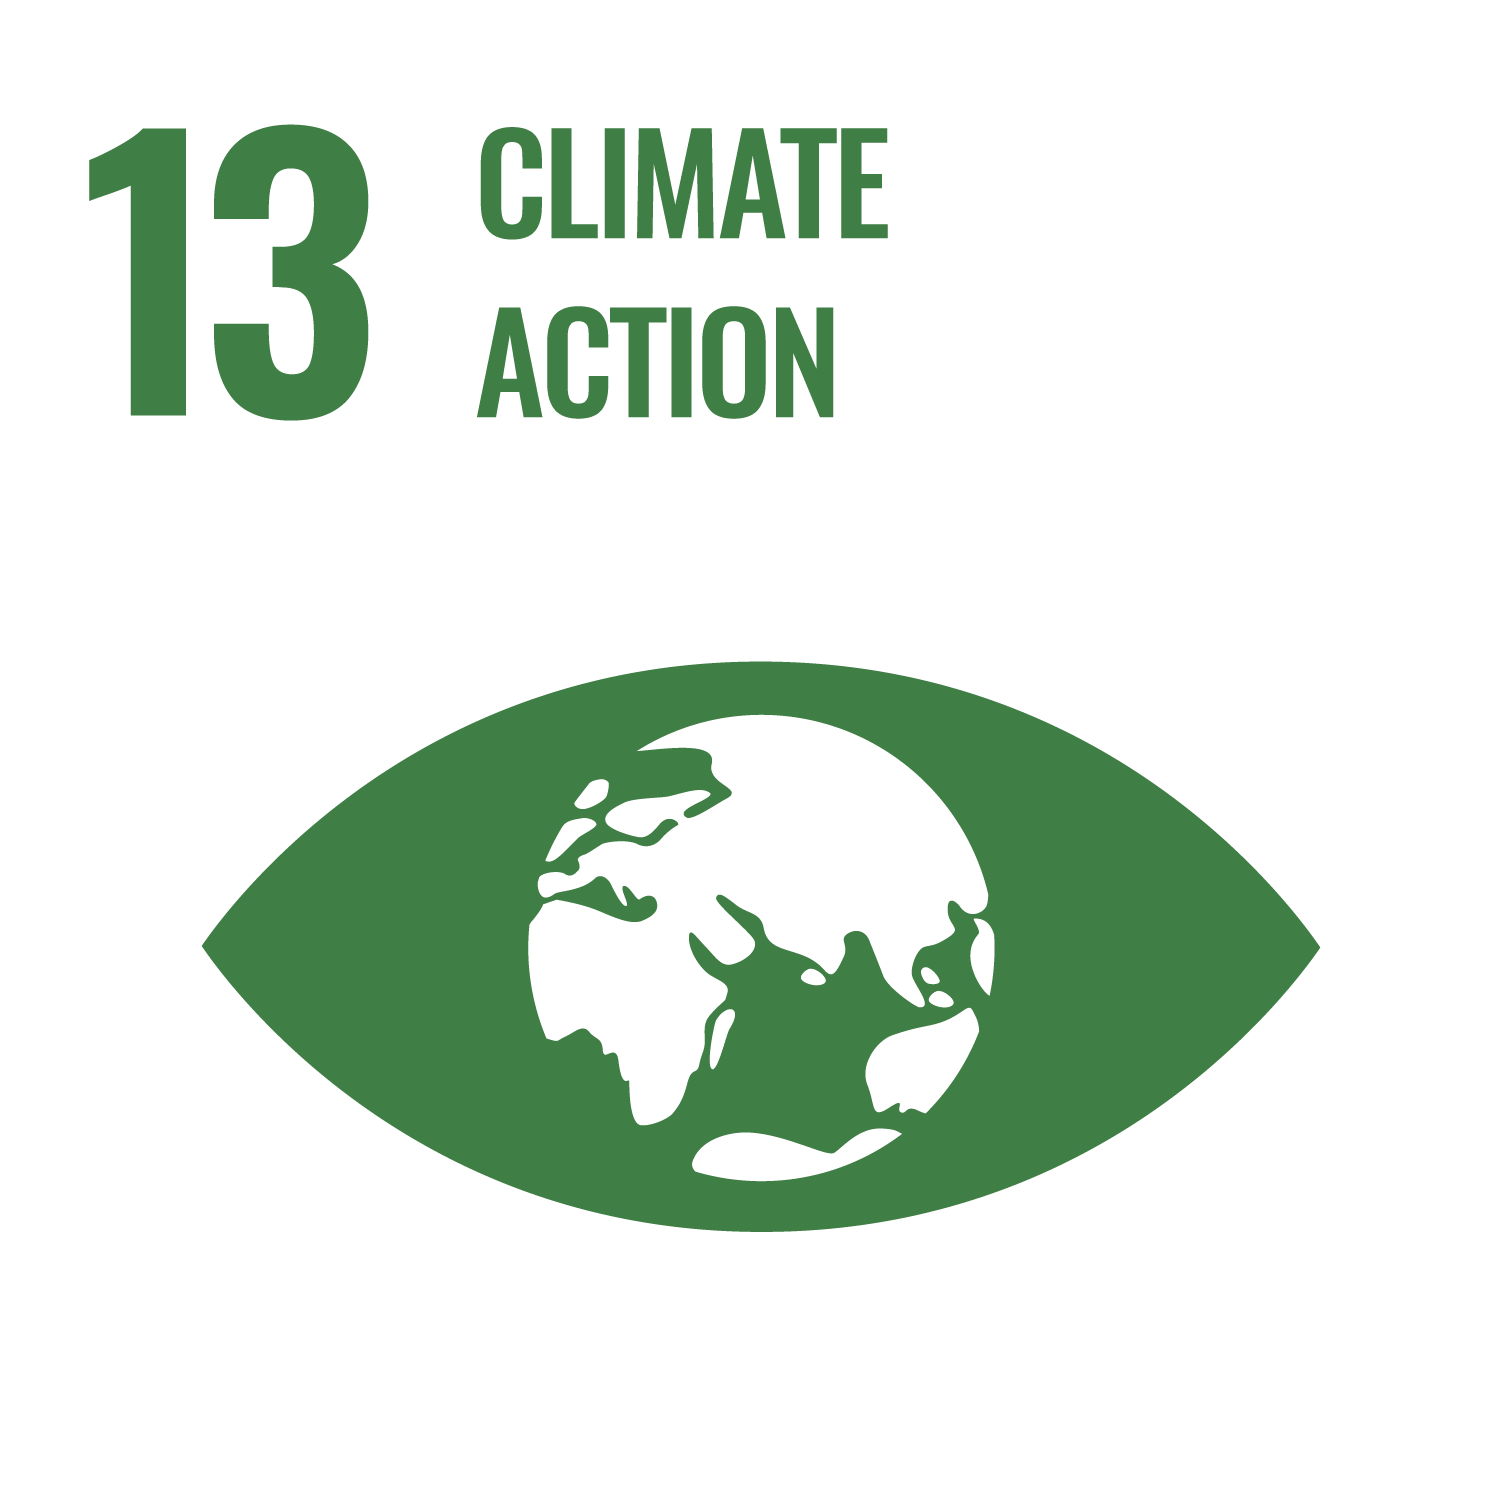 Image for Climate Action Sustainable Development Goal